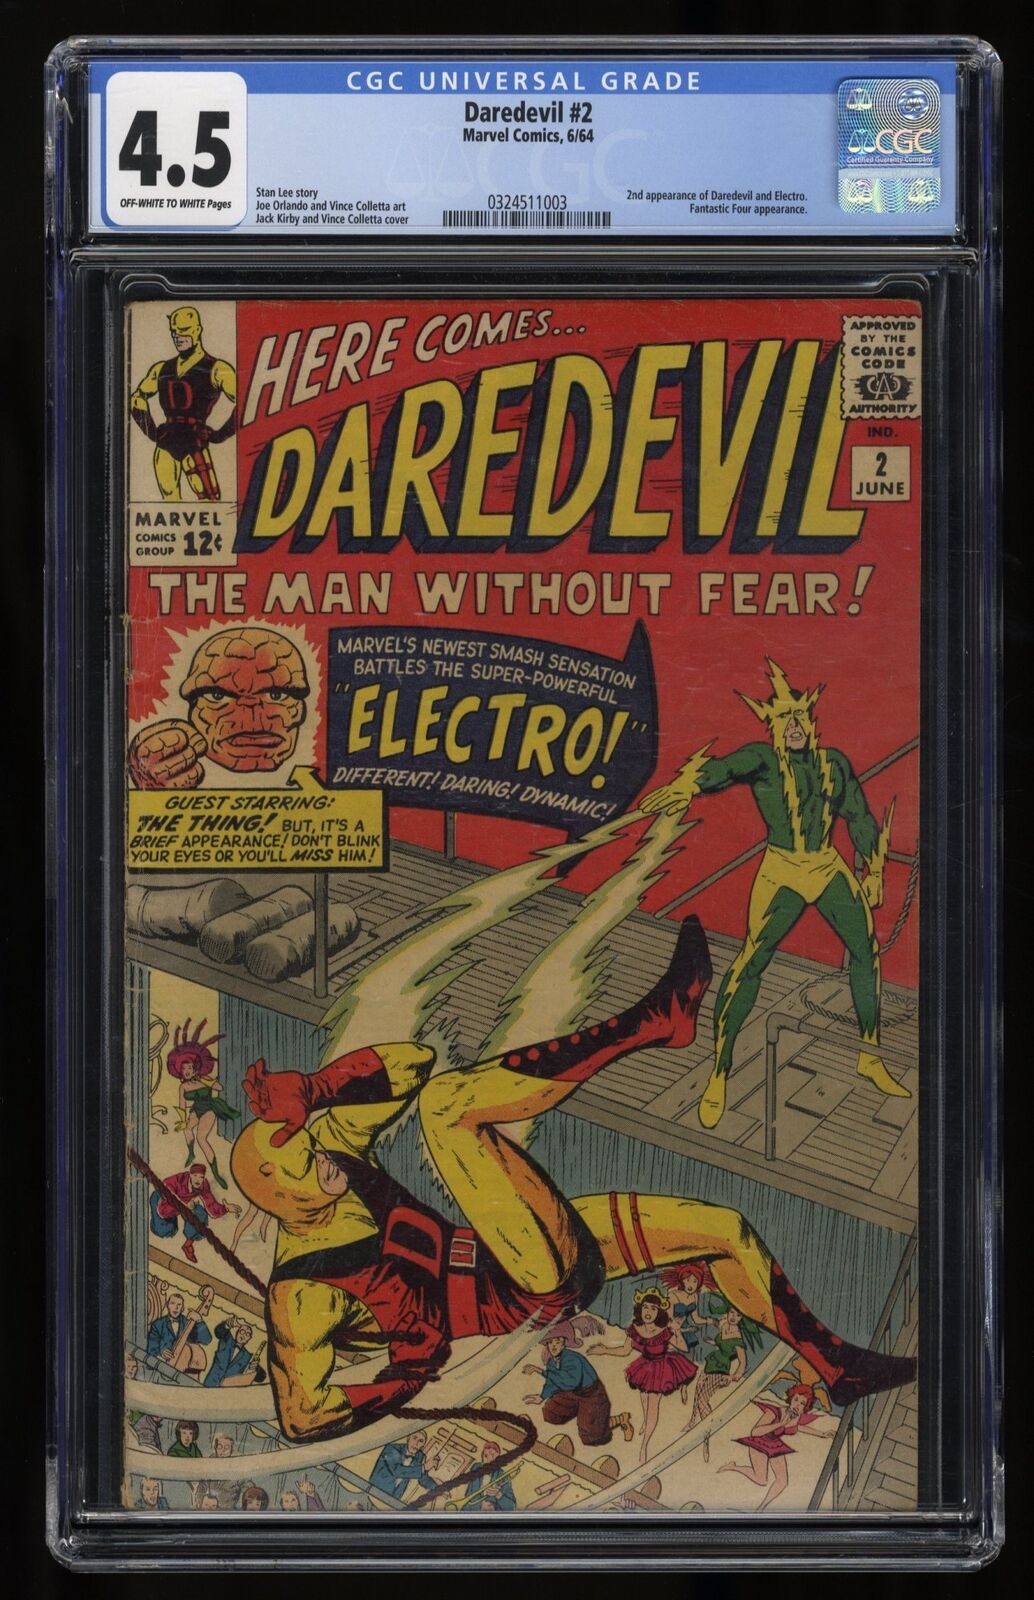 Daredevil (1964) #2 CGC VG+ 4.5 2nd Appearance Daredevil Electro Kirby Cover